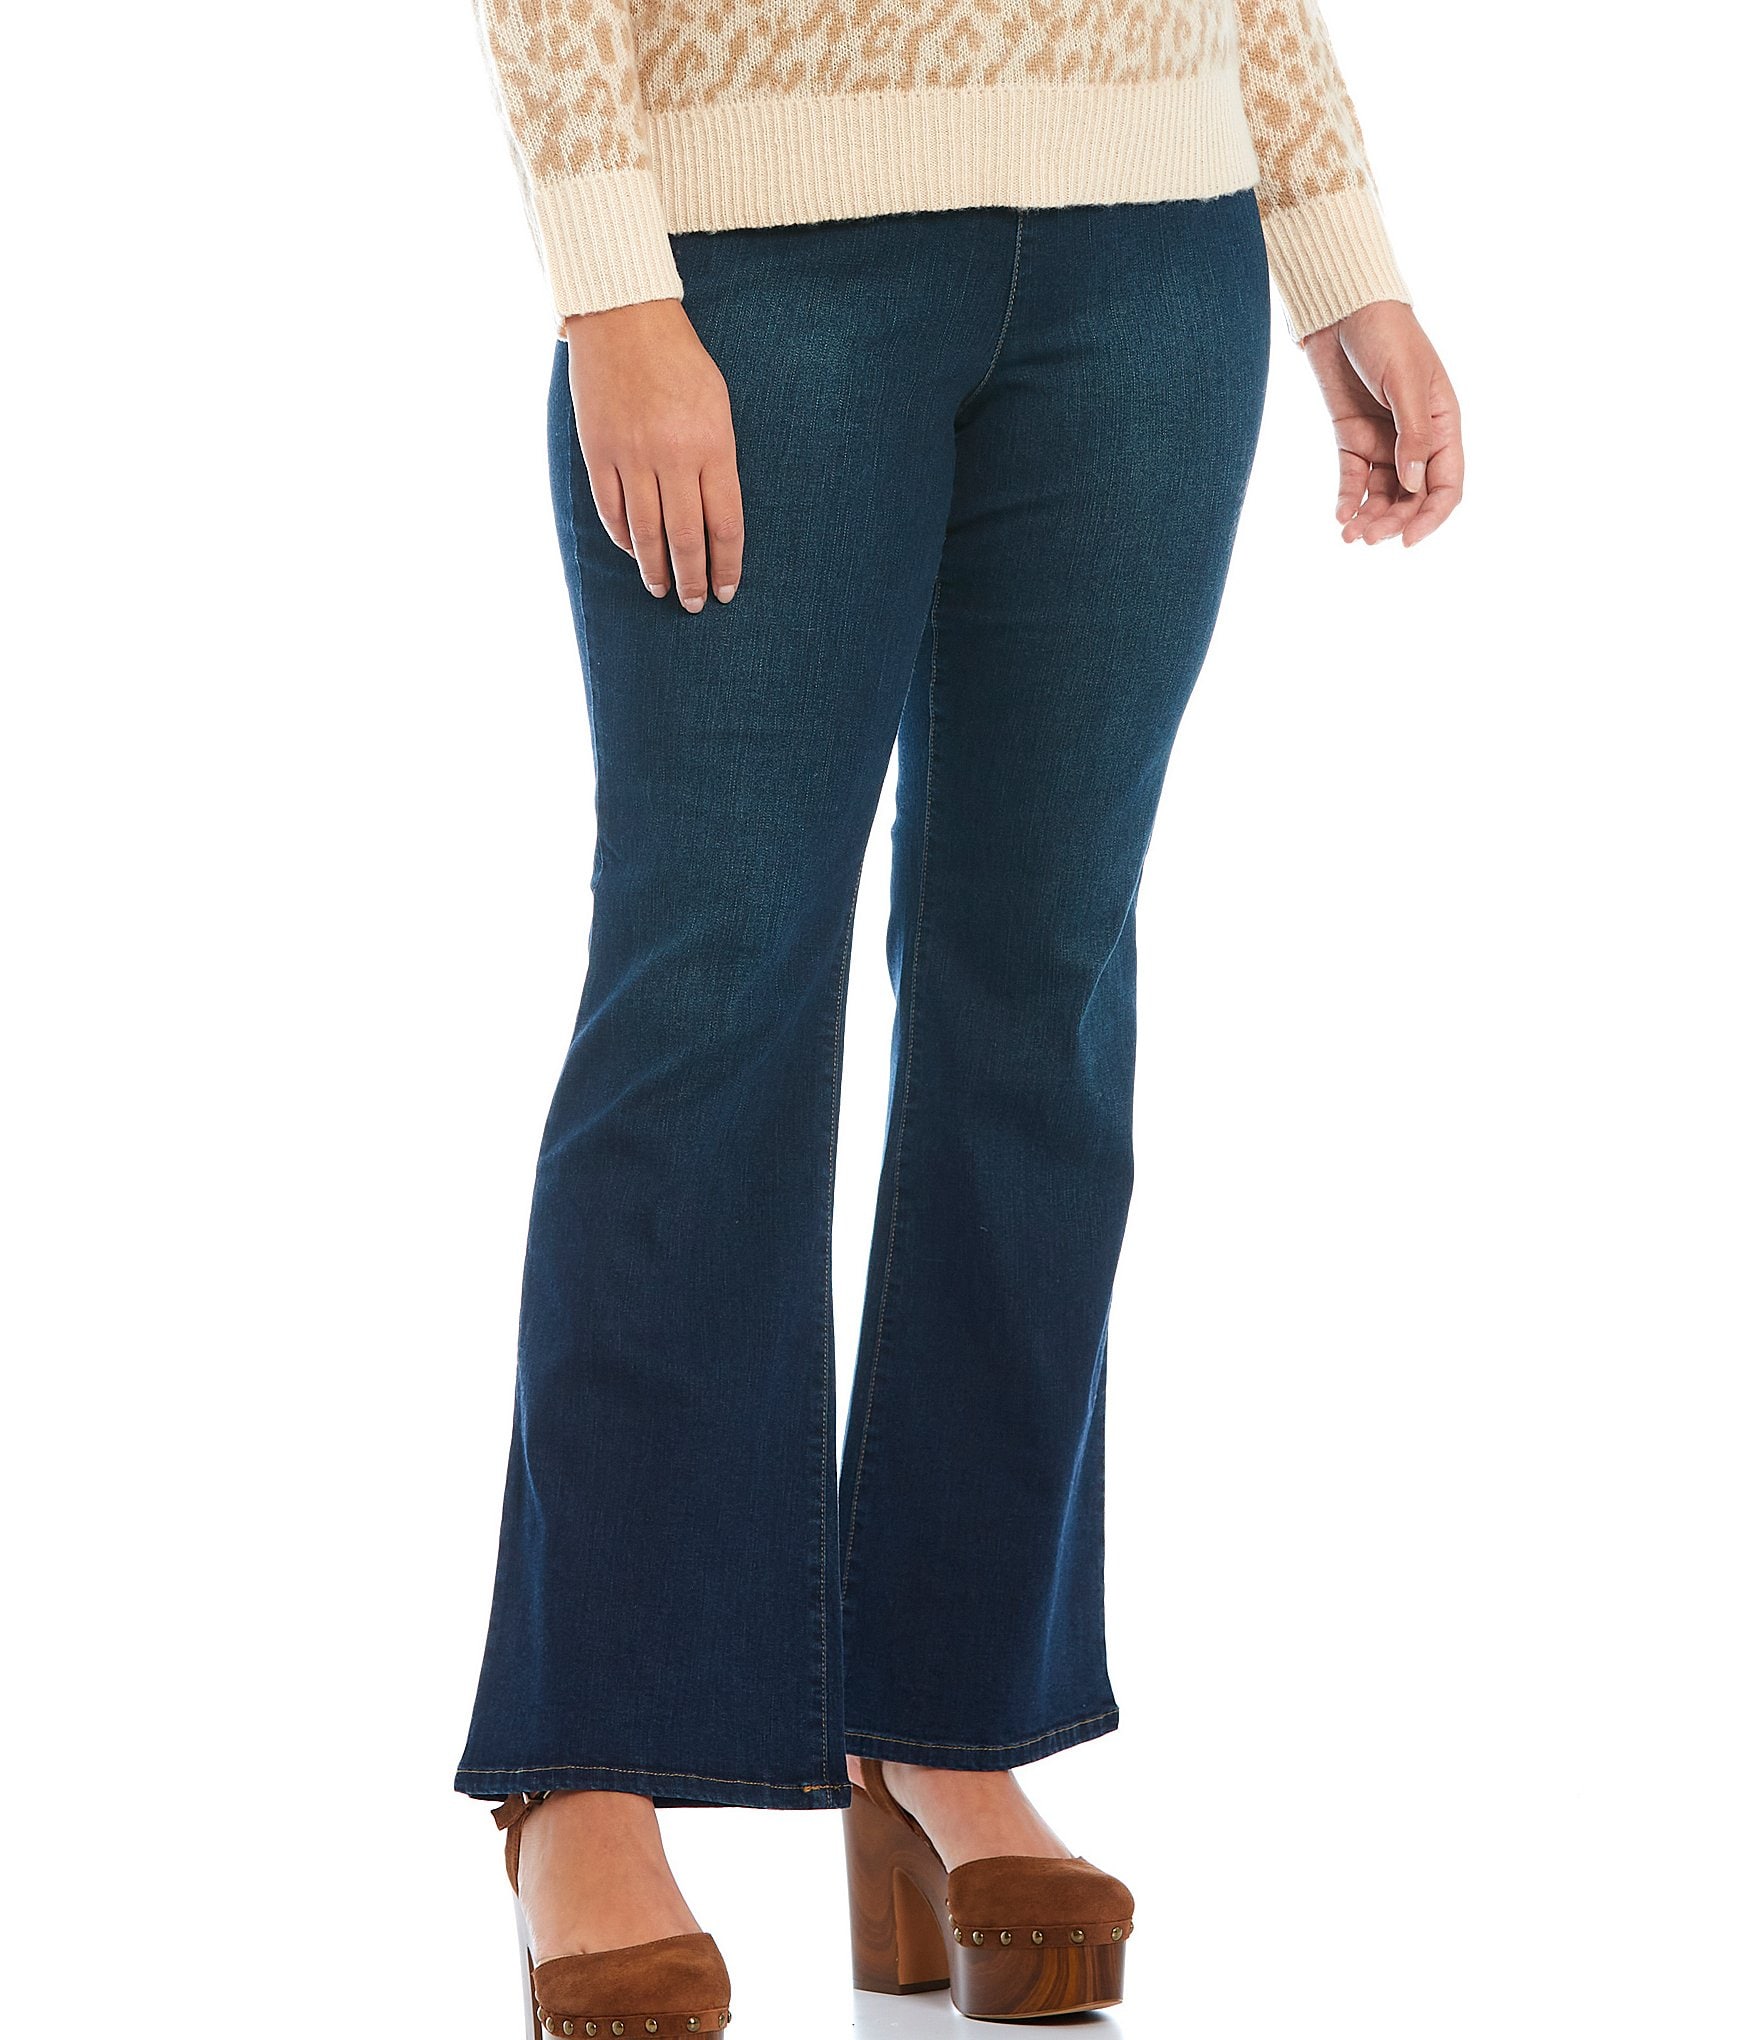 Pull on Stretch Jeans Plus Size 